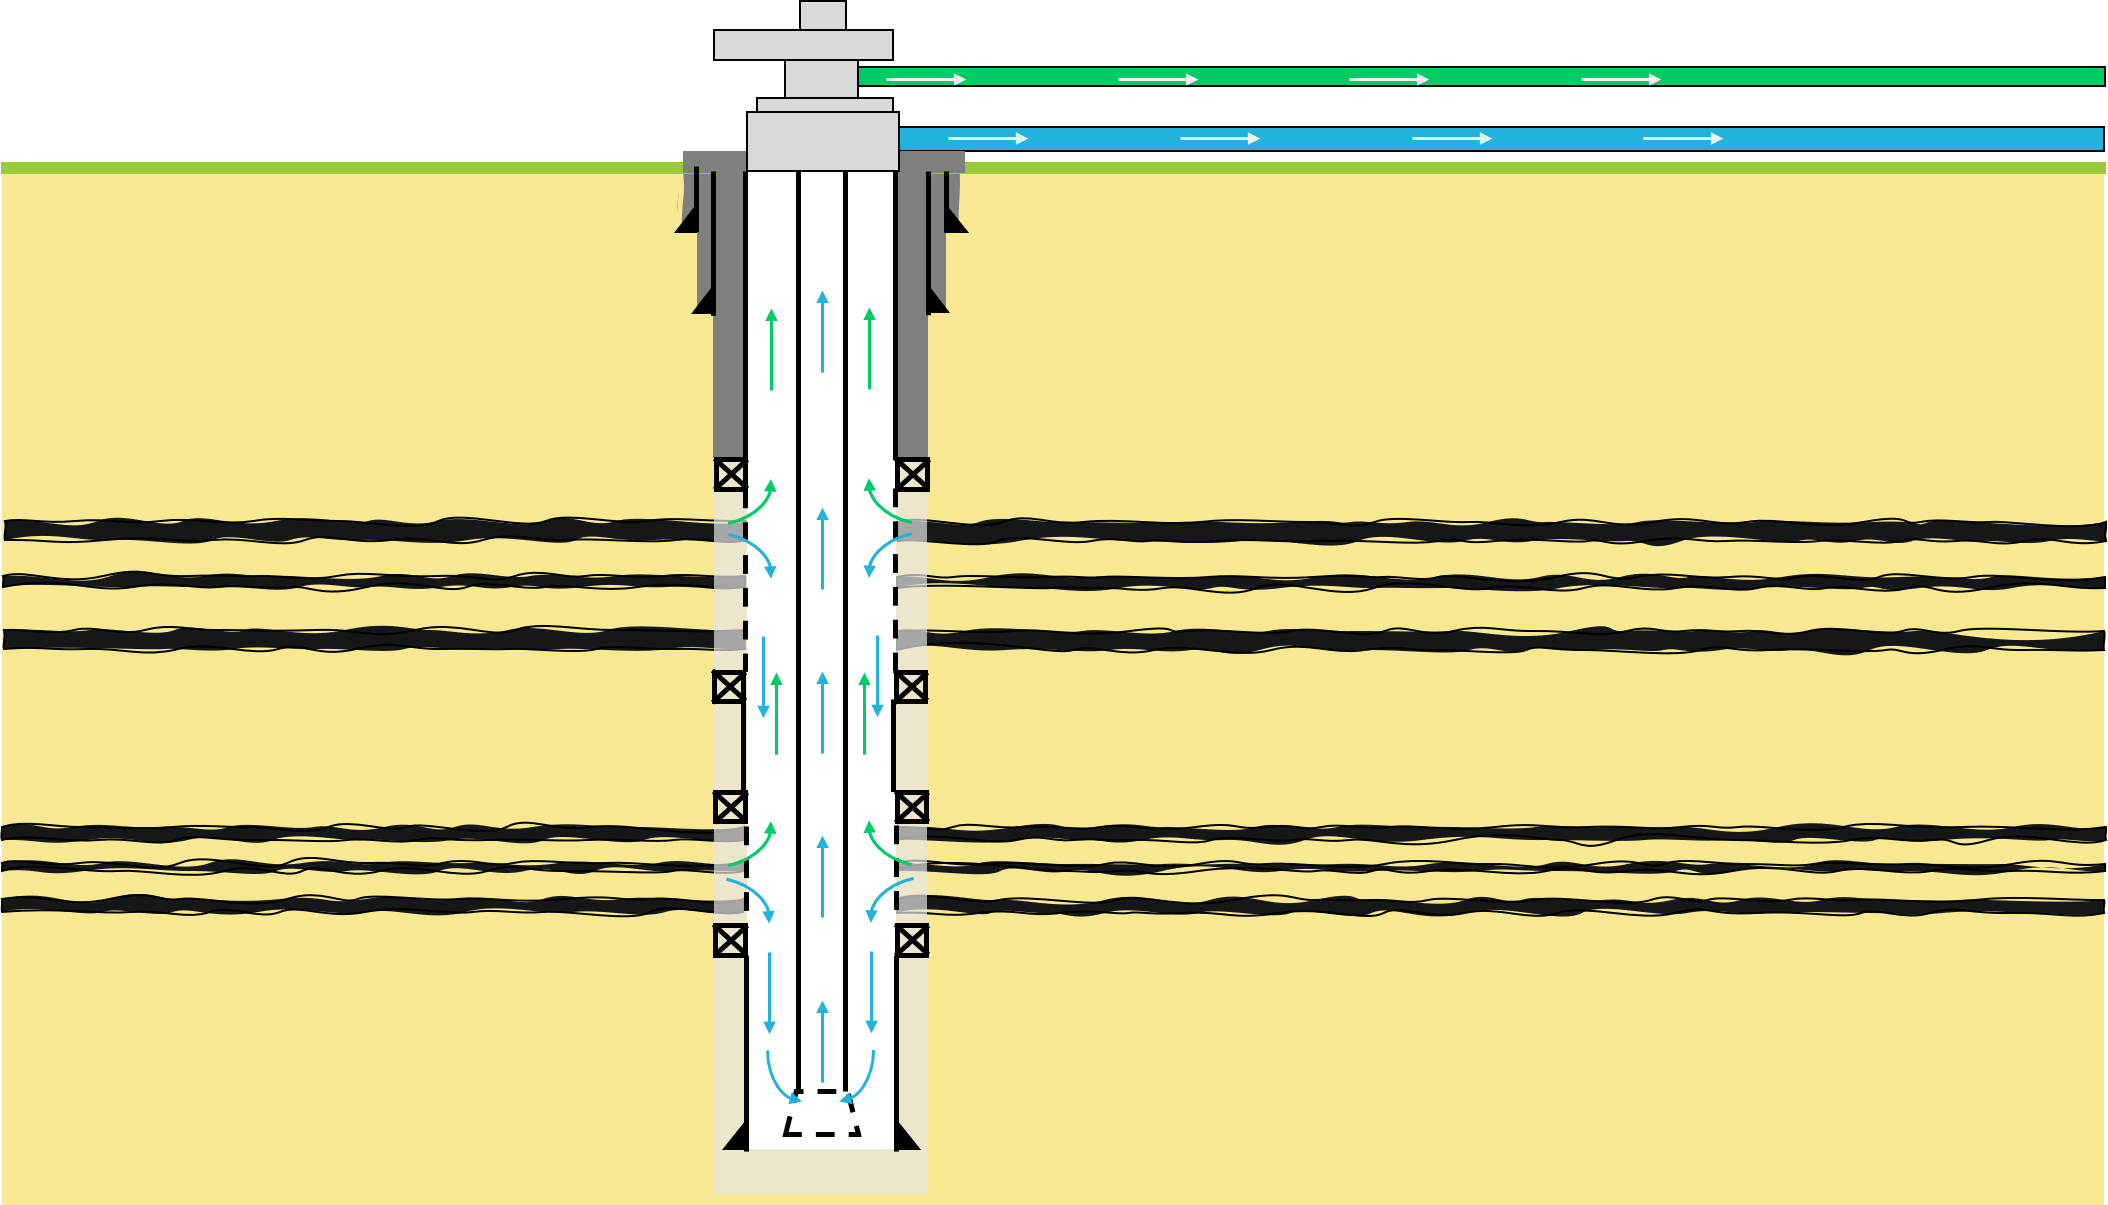 Coal seam gas open hole slotted liner completion diagram.